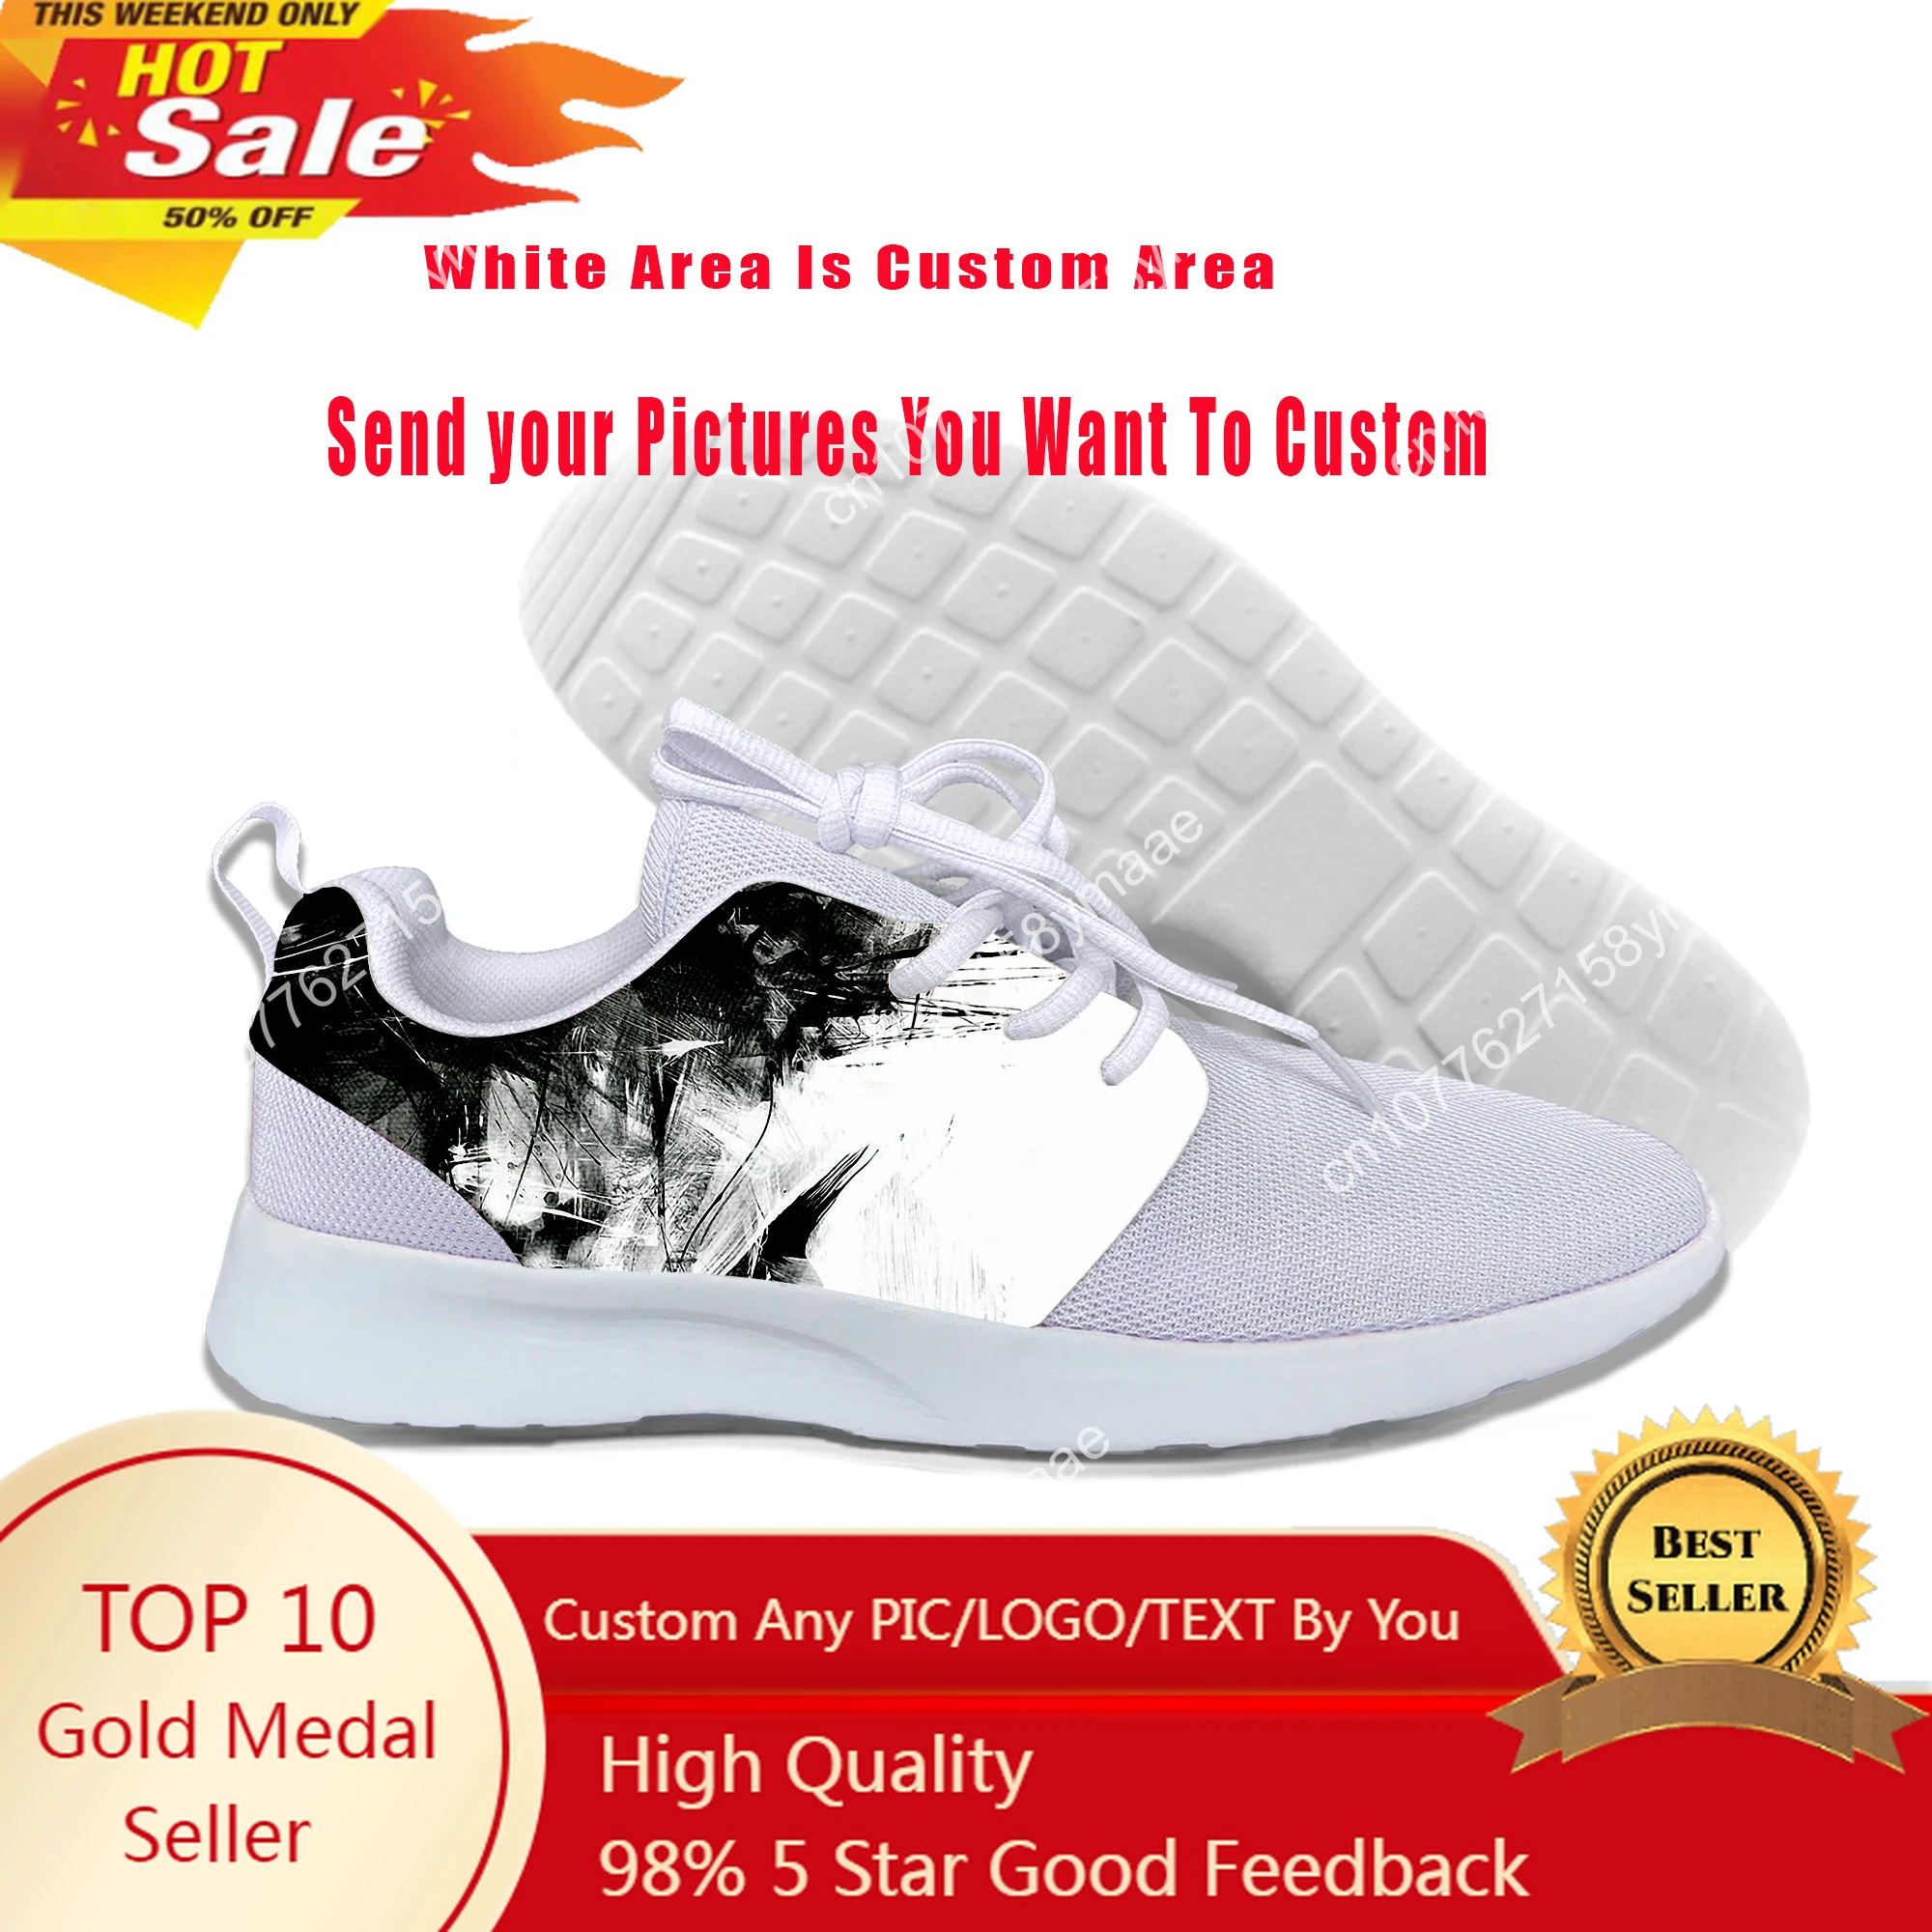 hot sale summer men shoes casual mesh sneakers lightweight men s running tennis breathable sports shoes men zapatillas hombre Hot Cool Splashed Paint Casual Shoes Summer Shoes Men Short Printed 3D Sneakers Lightweight Running Shoes Classic Sports Shoes